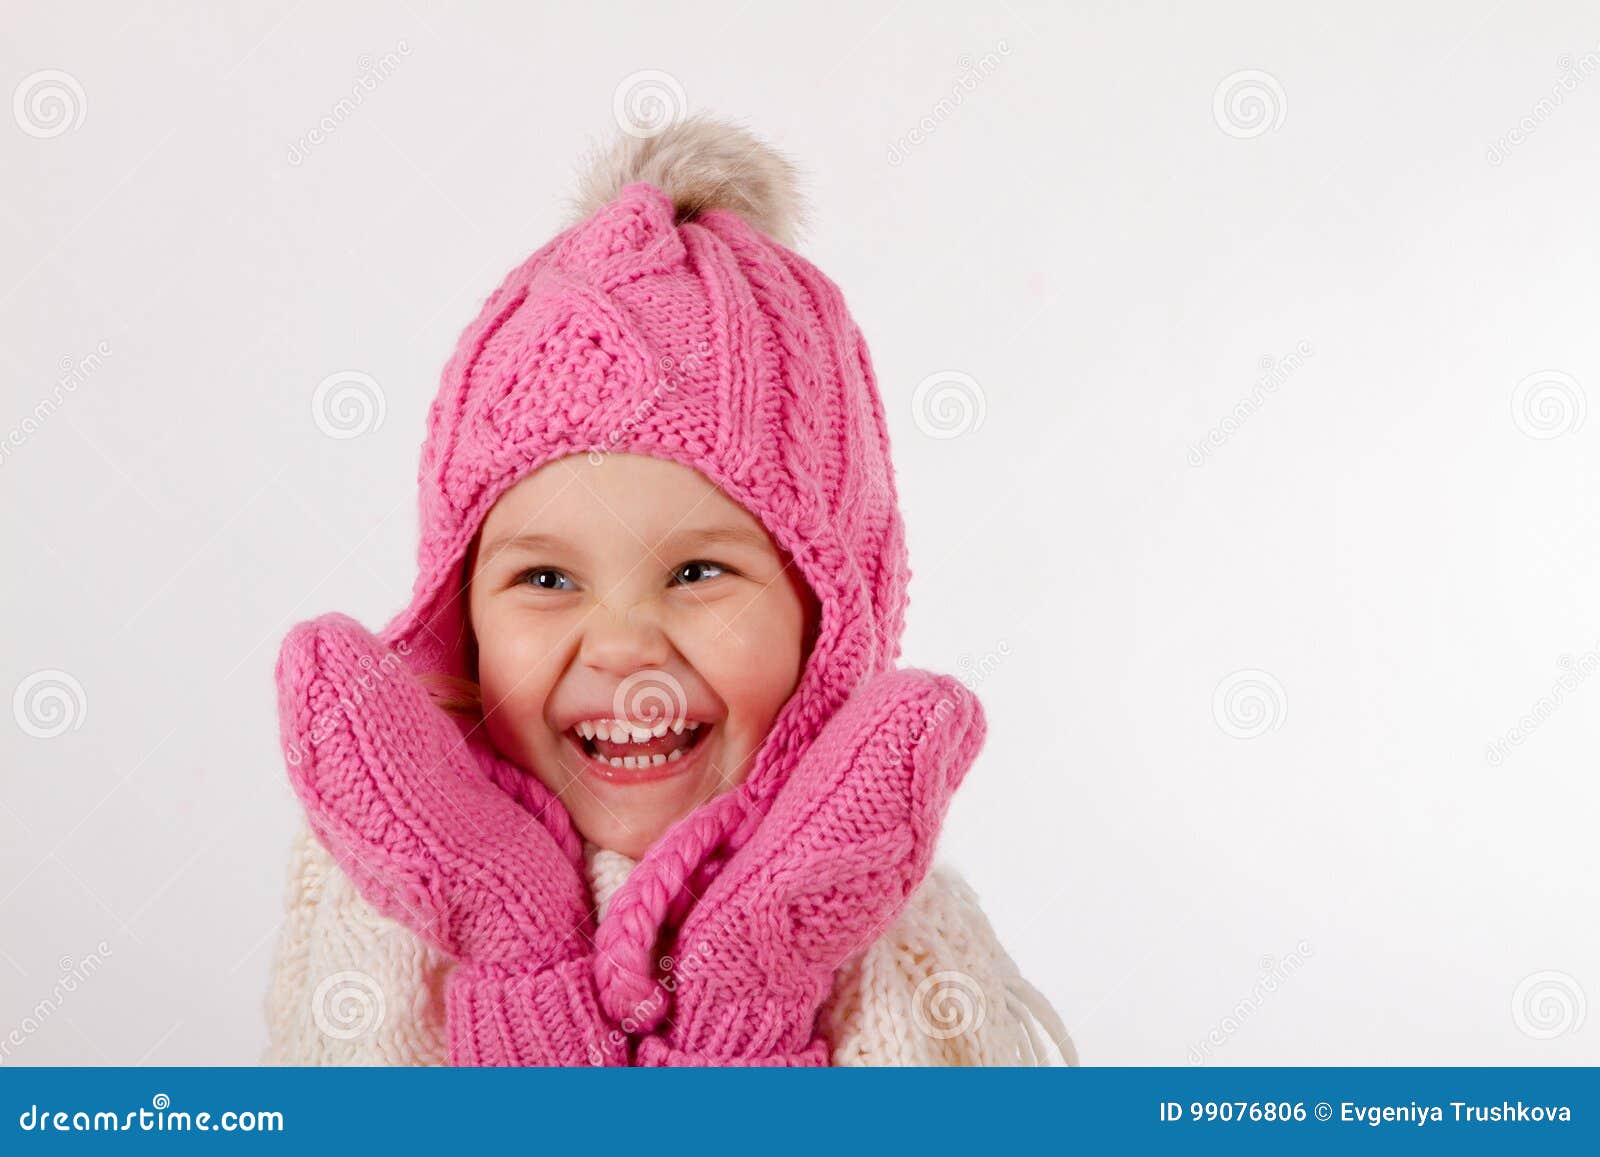 Girl in a Knitted Hat is Happy Stock Photo - Image of cute, knitted ...